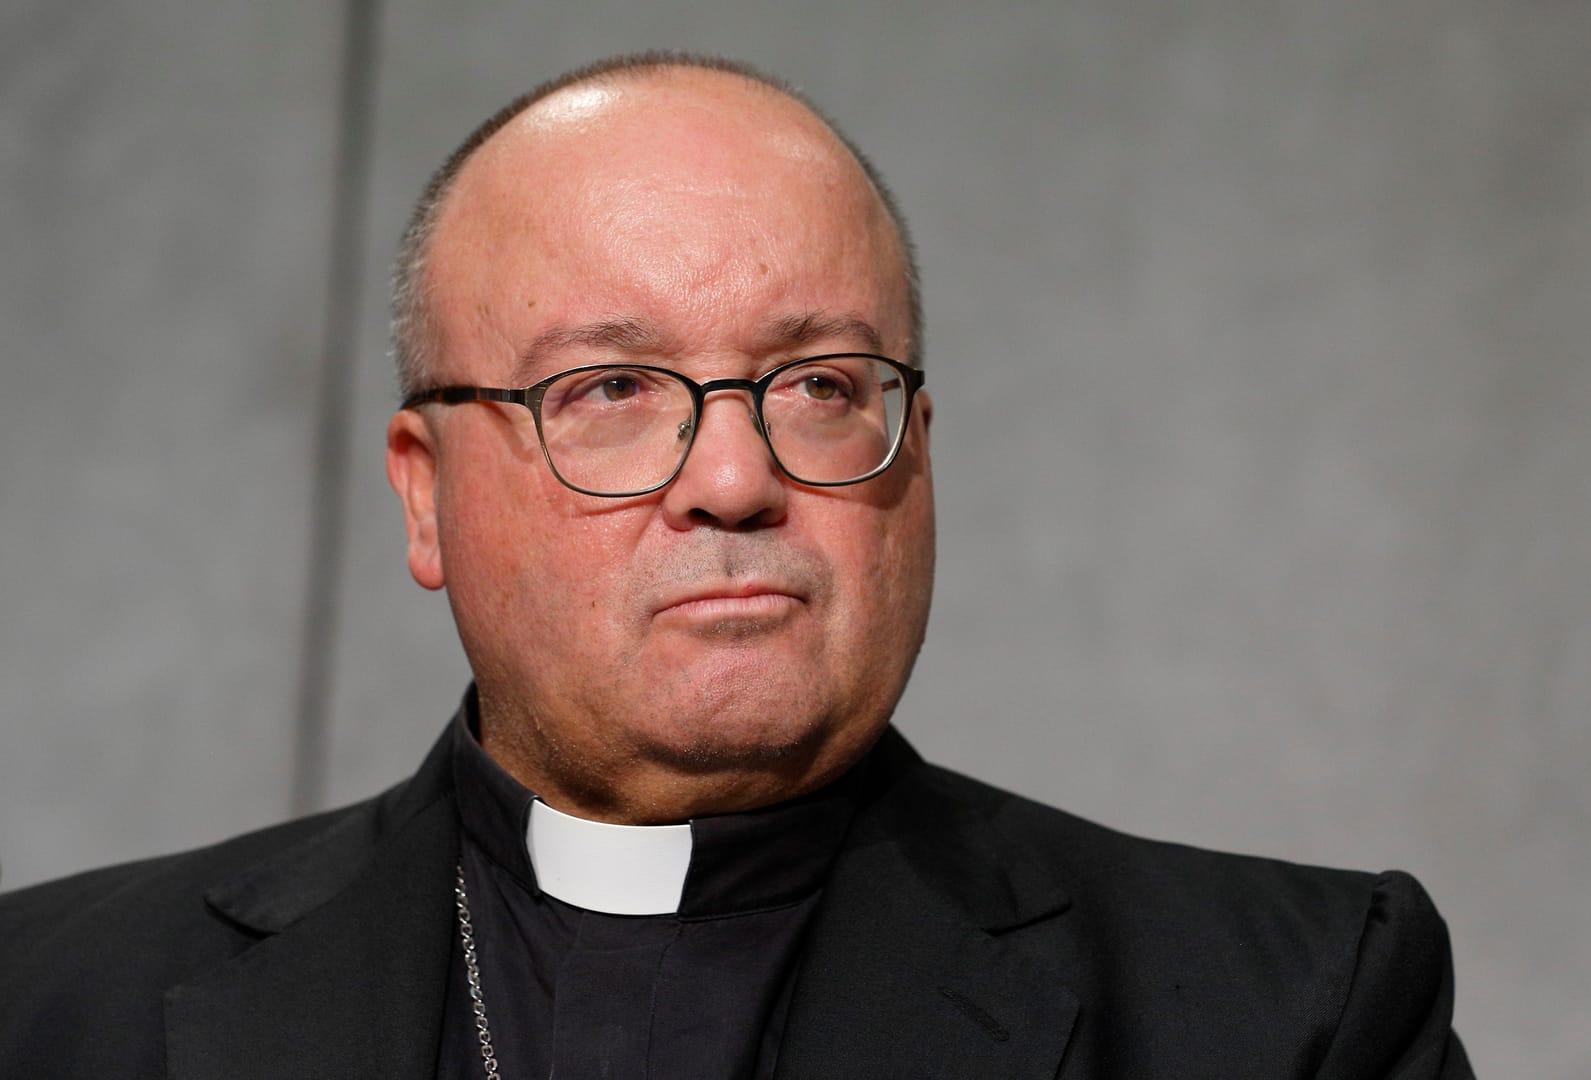 Maltese archbishop apologizes after priest says being gay ‘worse than being possessed’